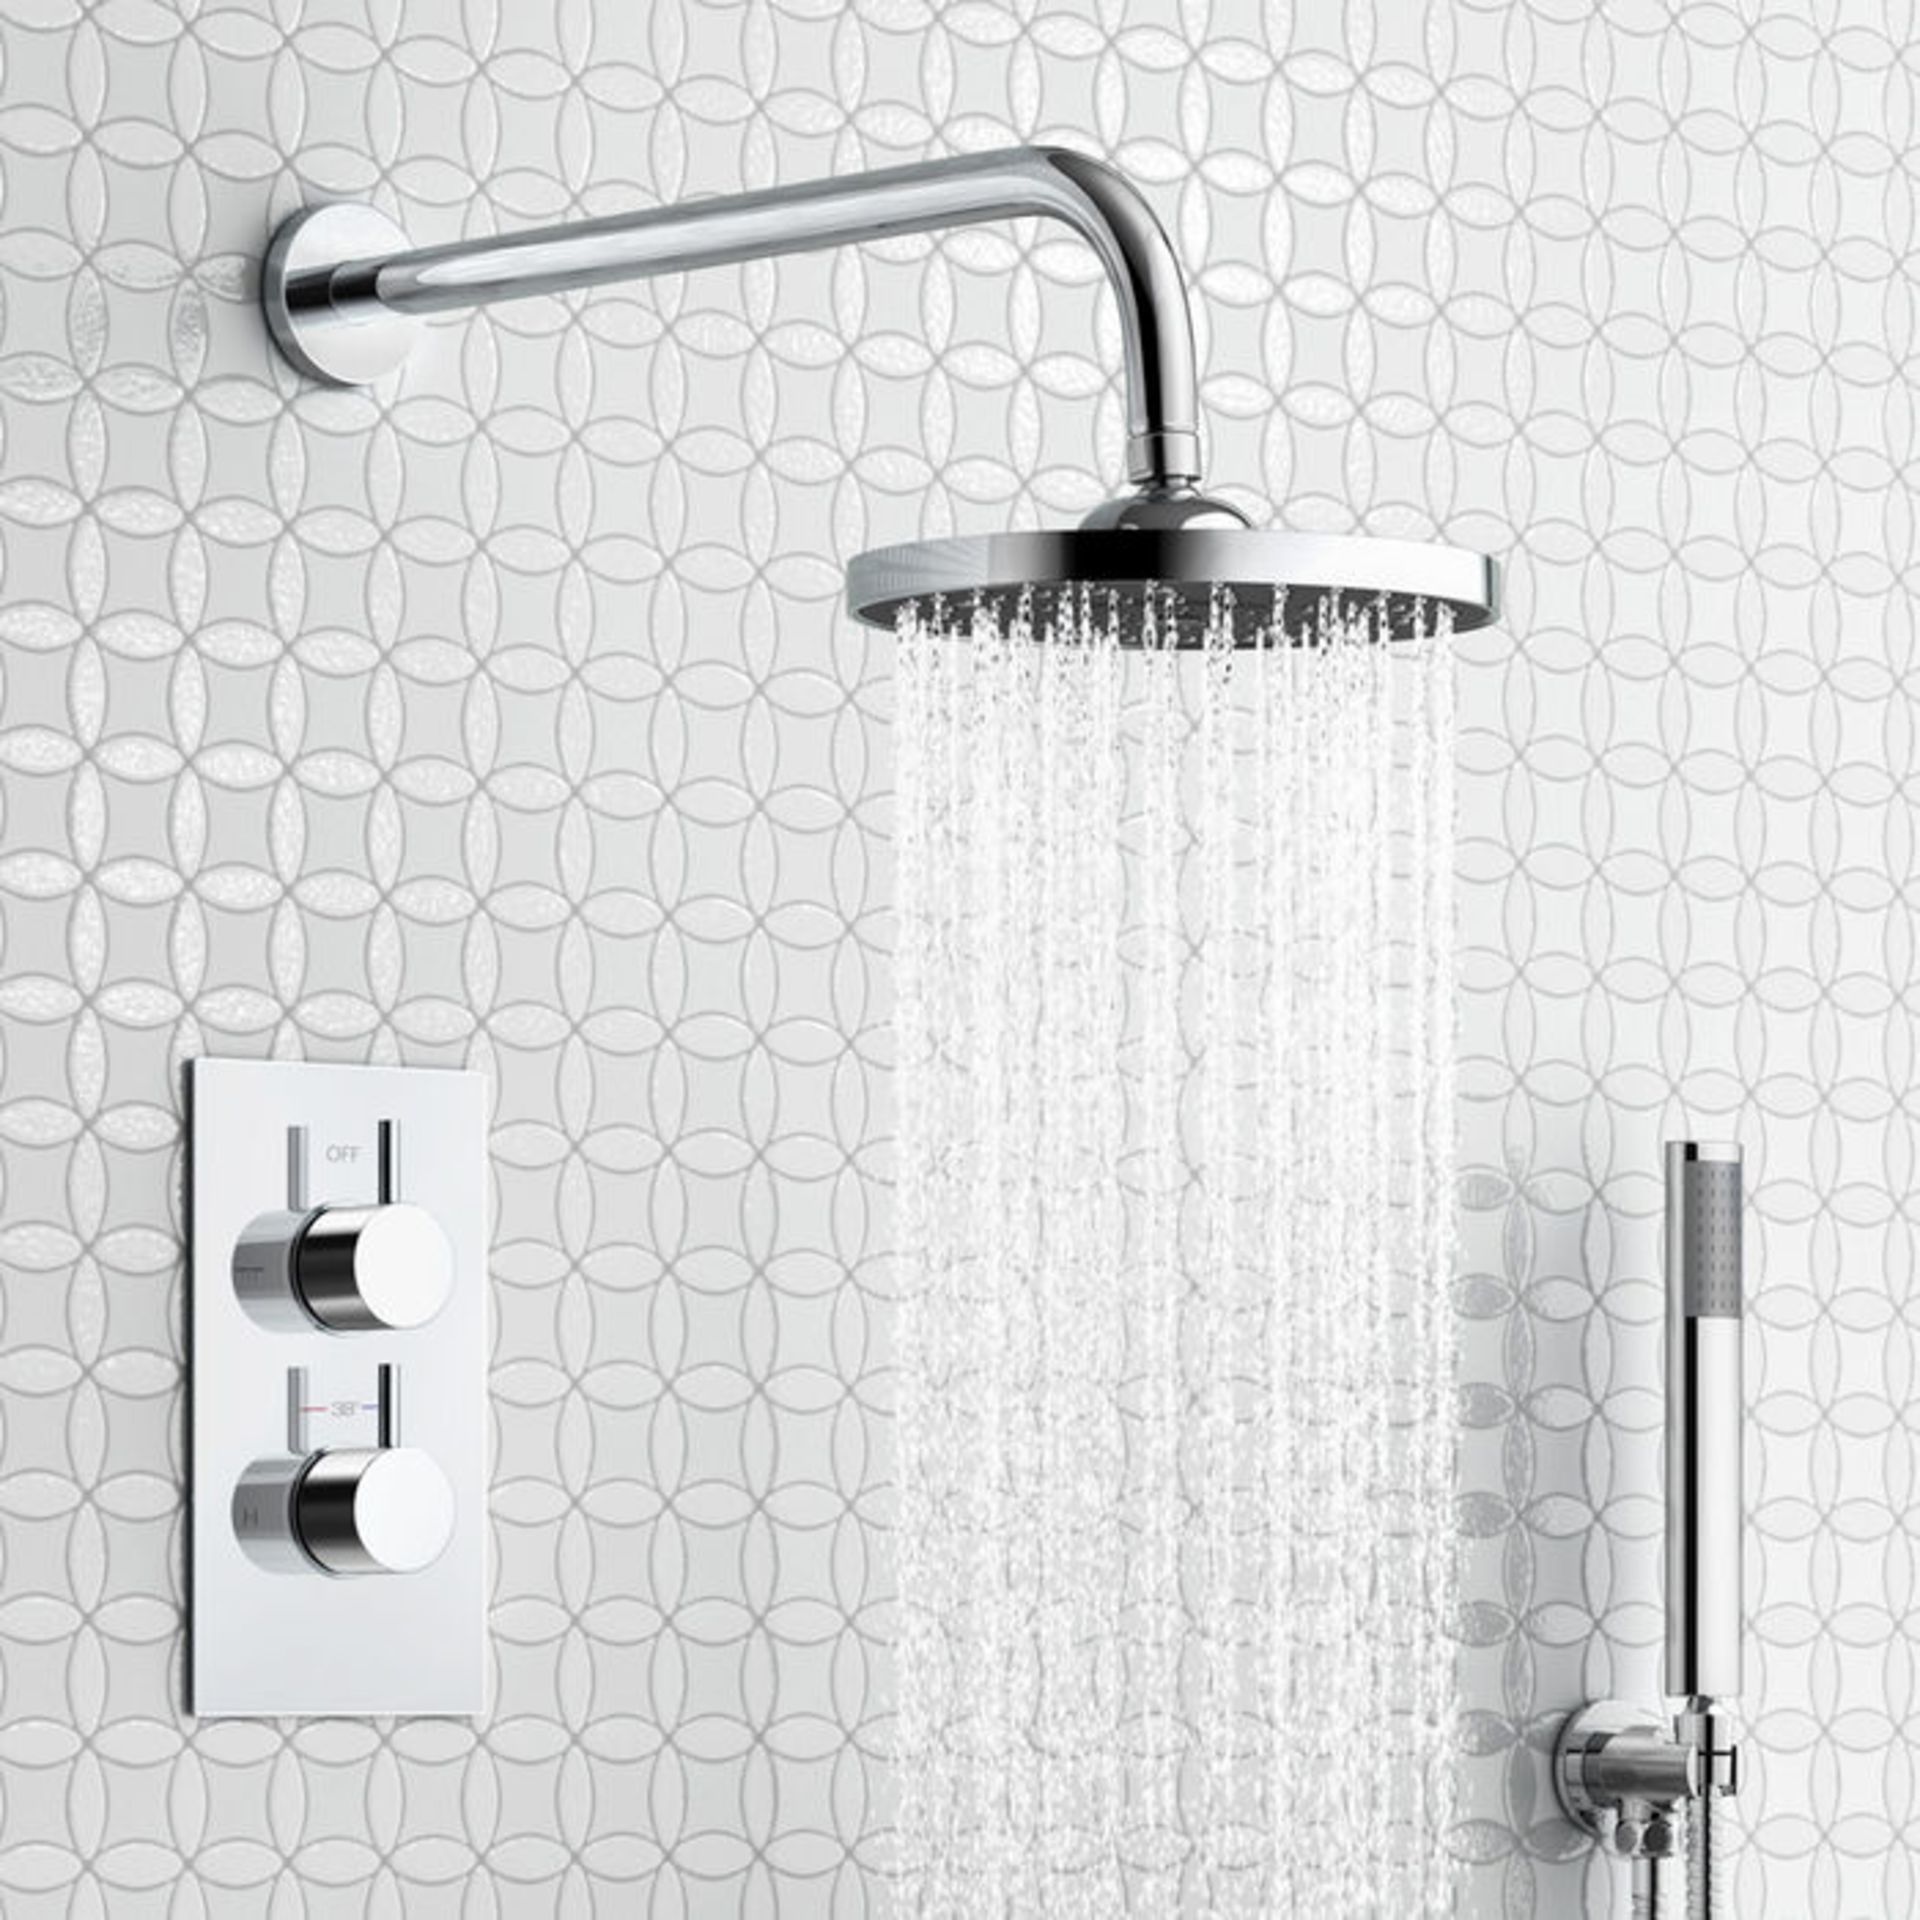 (H38) Round Concealed Thermostatic Mixer Shower Kit & Medium Head. Family friendly detachable hand